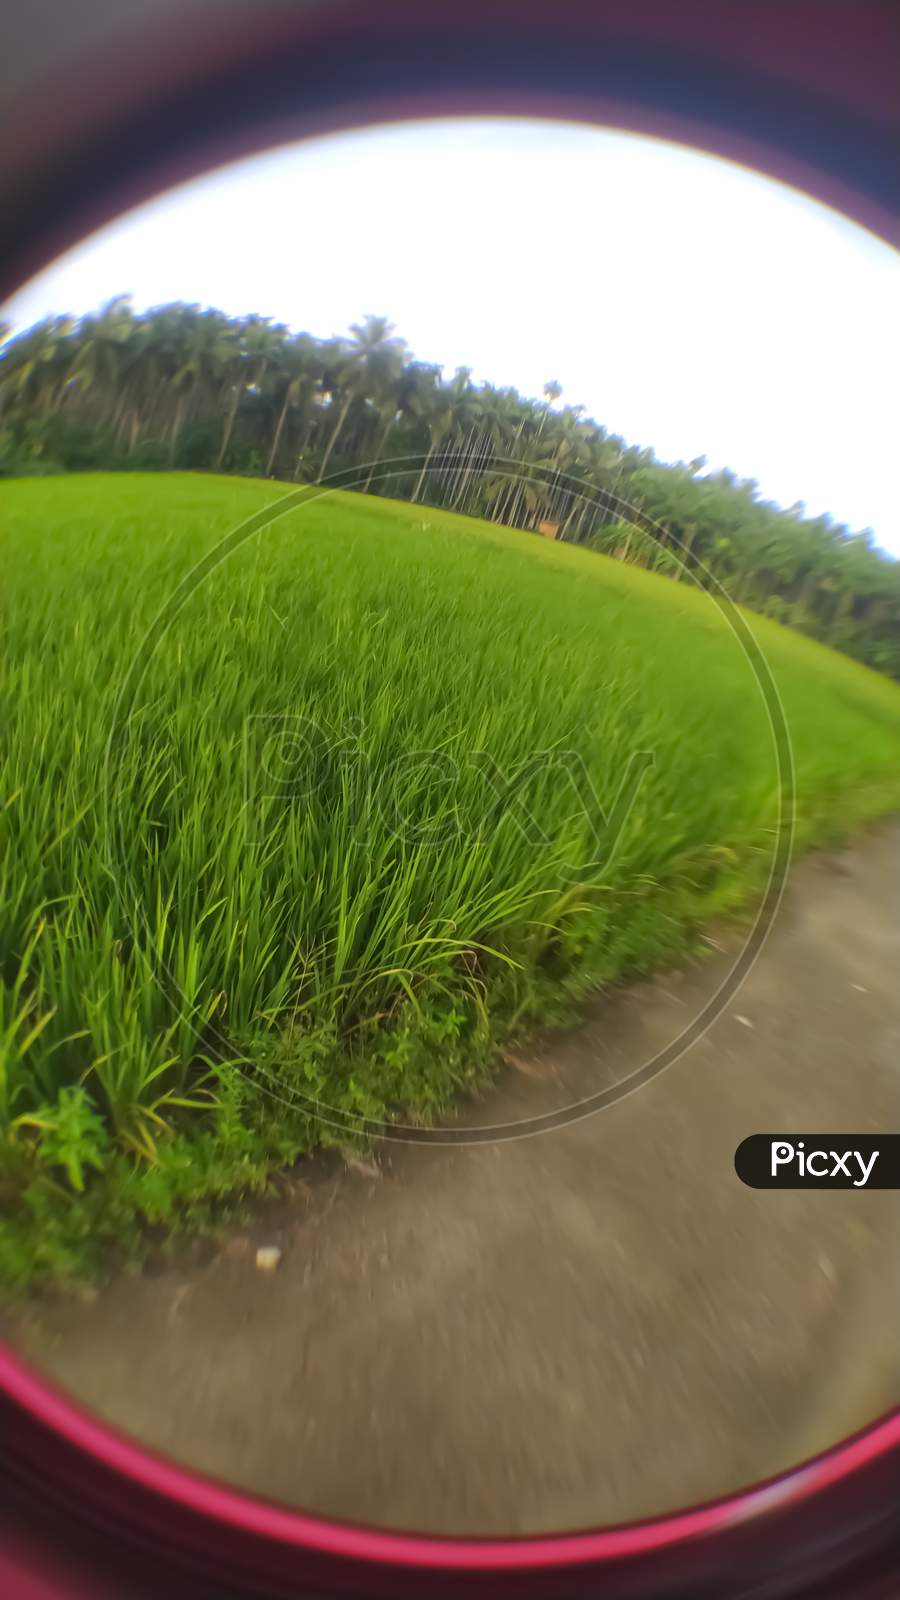 Closeup Of Paddy Field Focus On The Middle